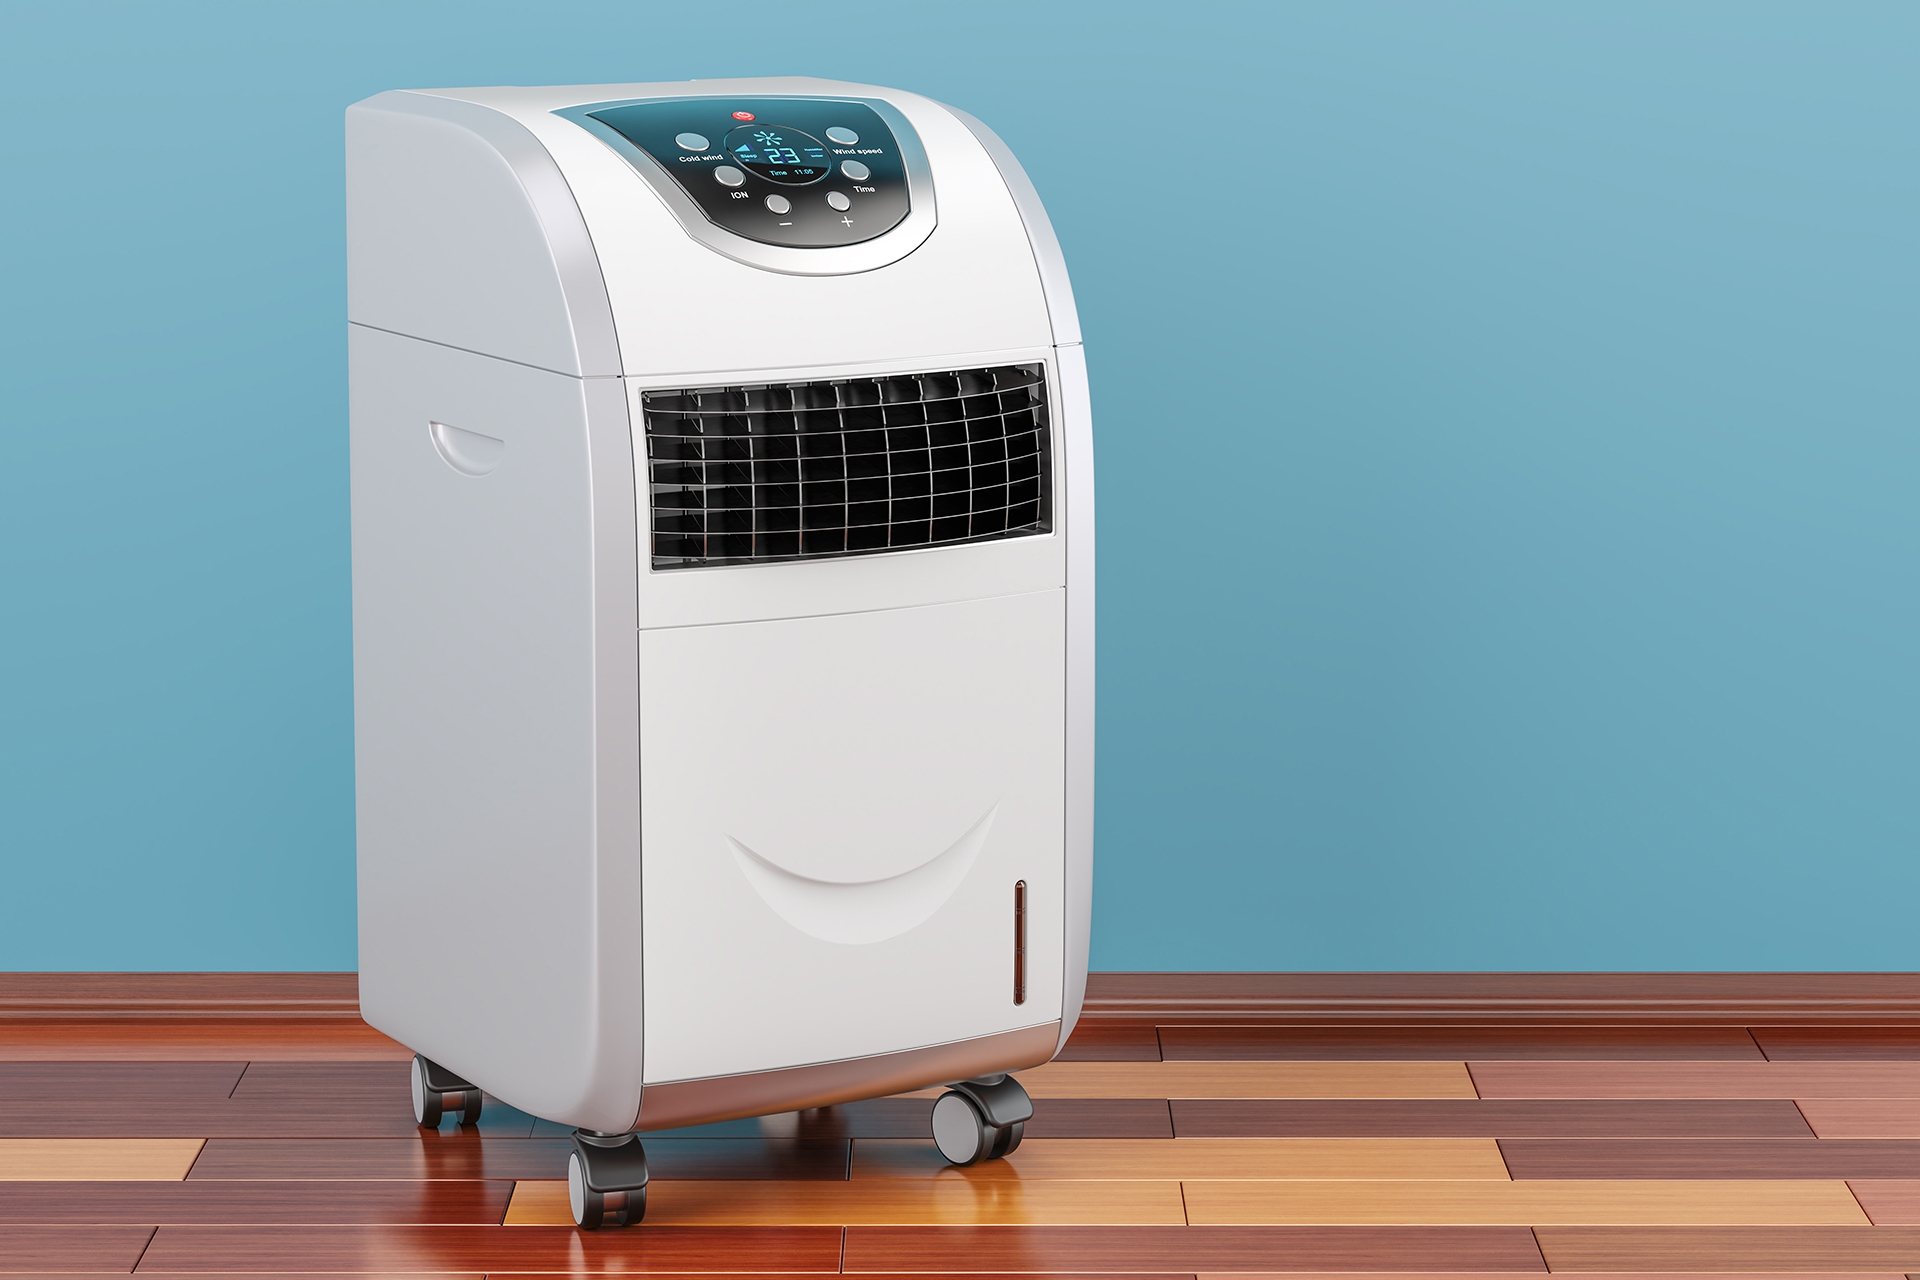 Portable Air Conditioners: Pros and Cons